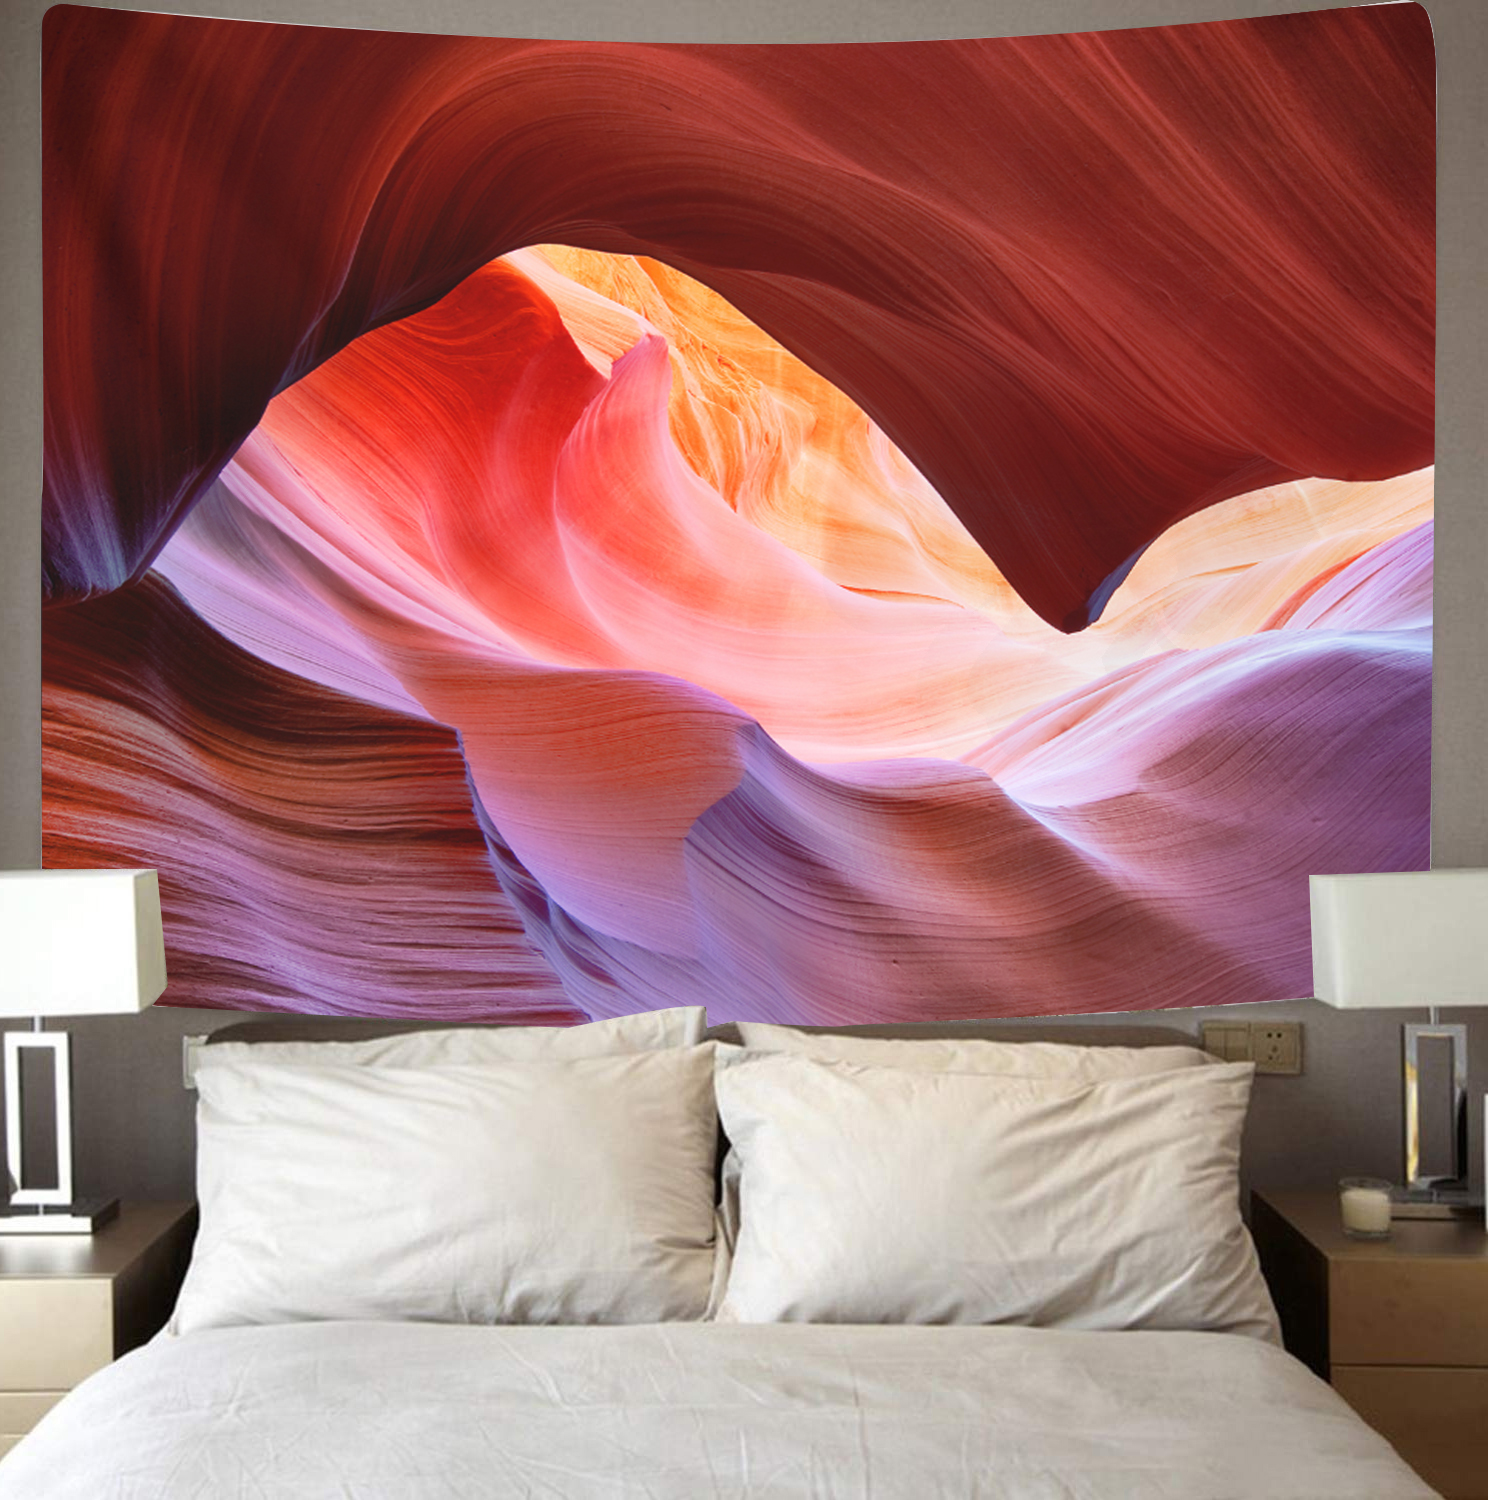 Antelope Canyon Nature Landscape Tapestry Wall Hanging For Room, Sold As 1 Panel